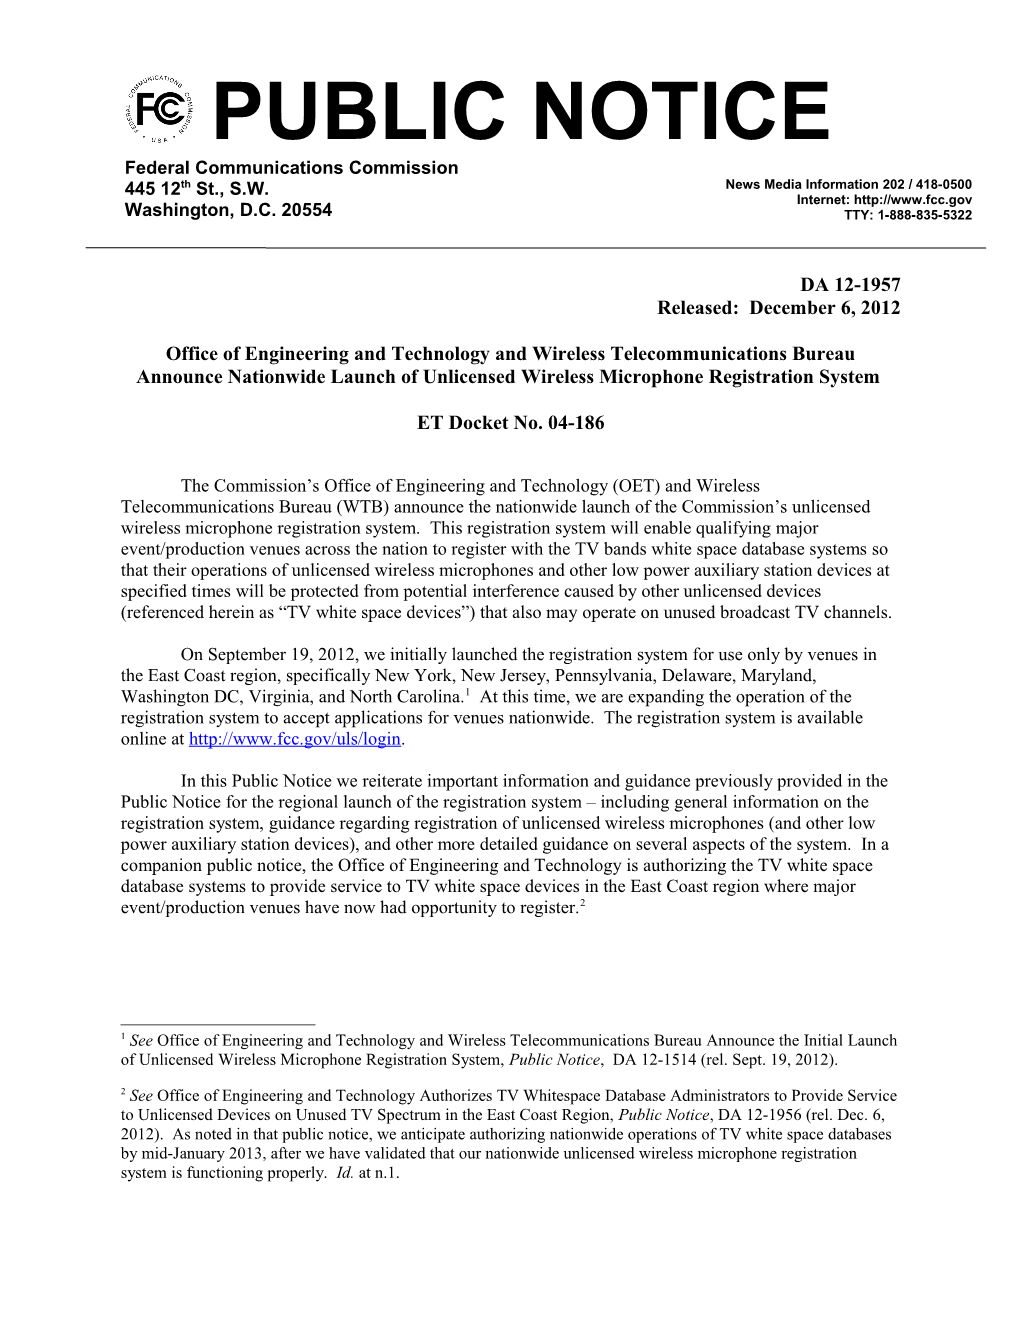 Office of Engineering and Technology and Wireless Telecommunications Bureau Announce Nationwide